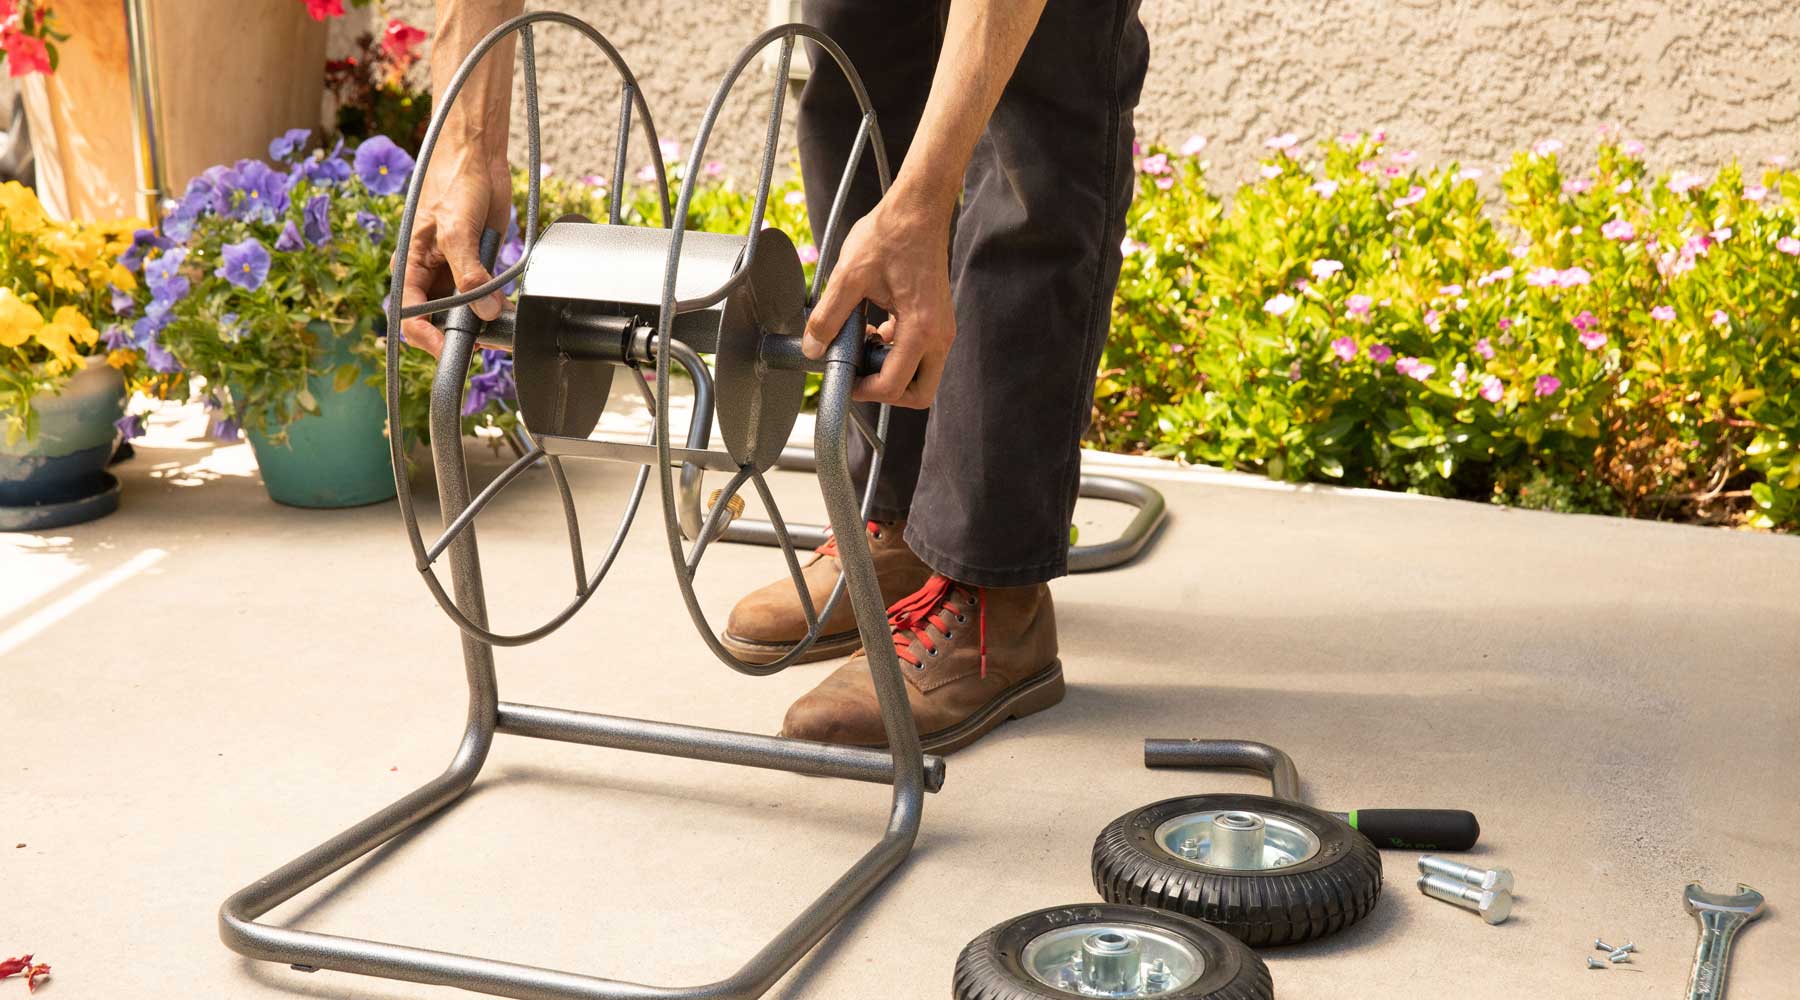 Repairing Your Garden Hose Reel: Tools and Parts You'll Need